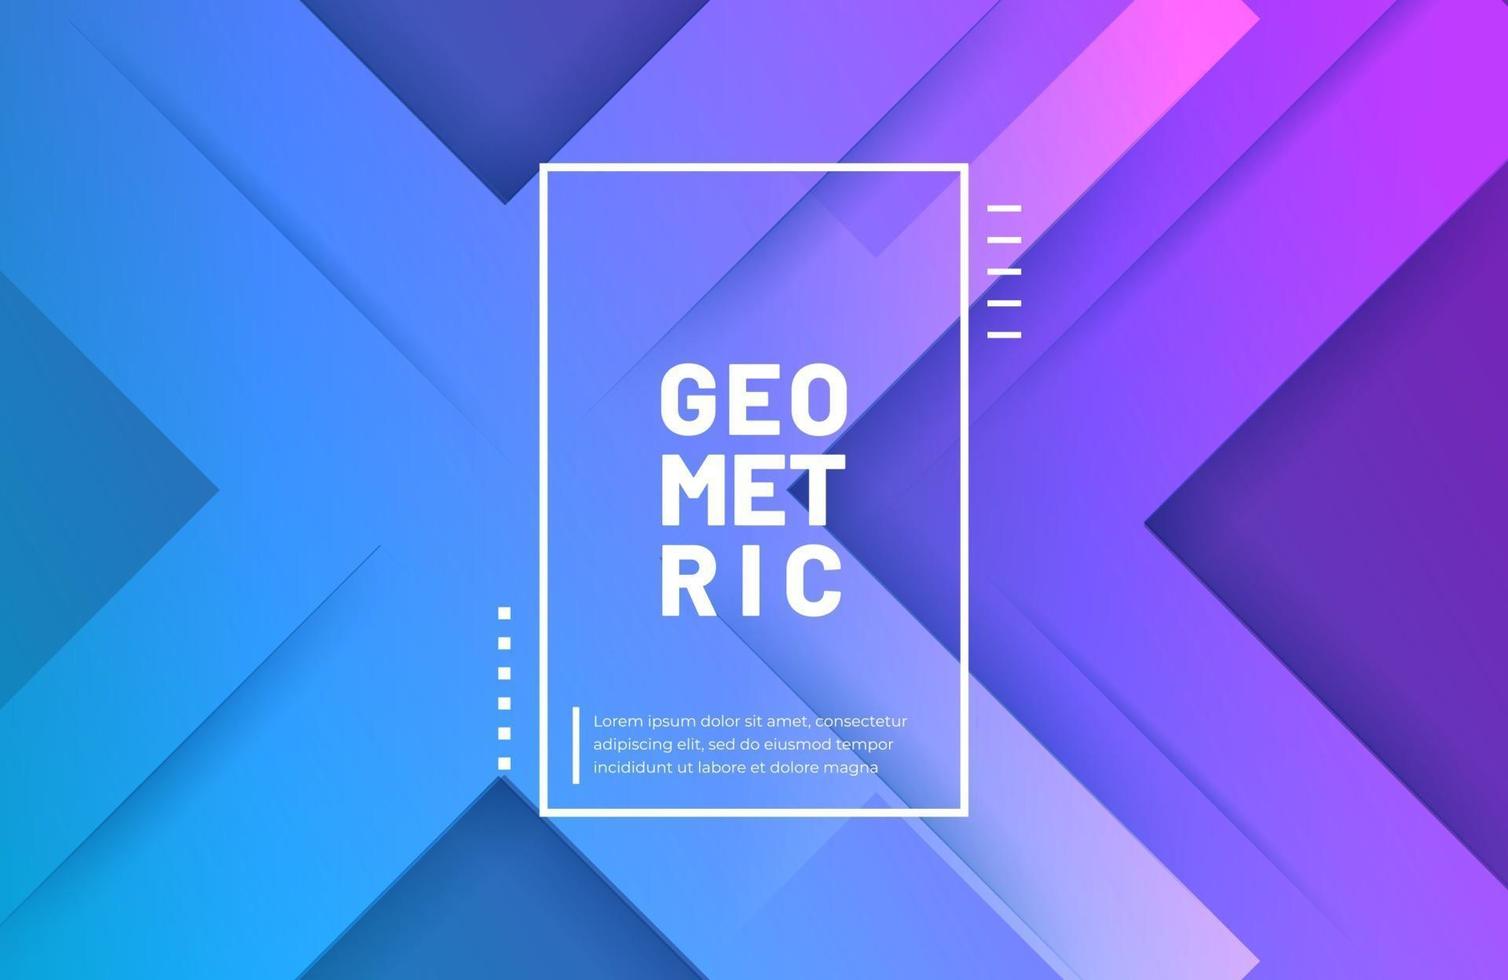 Abstract geometric background with modern gradient color vector